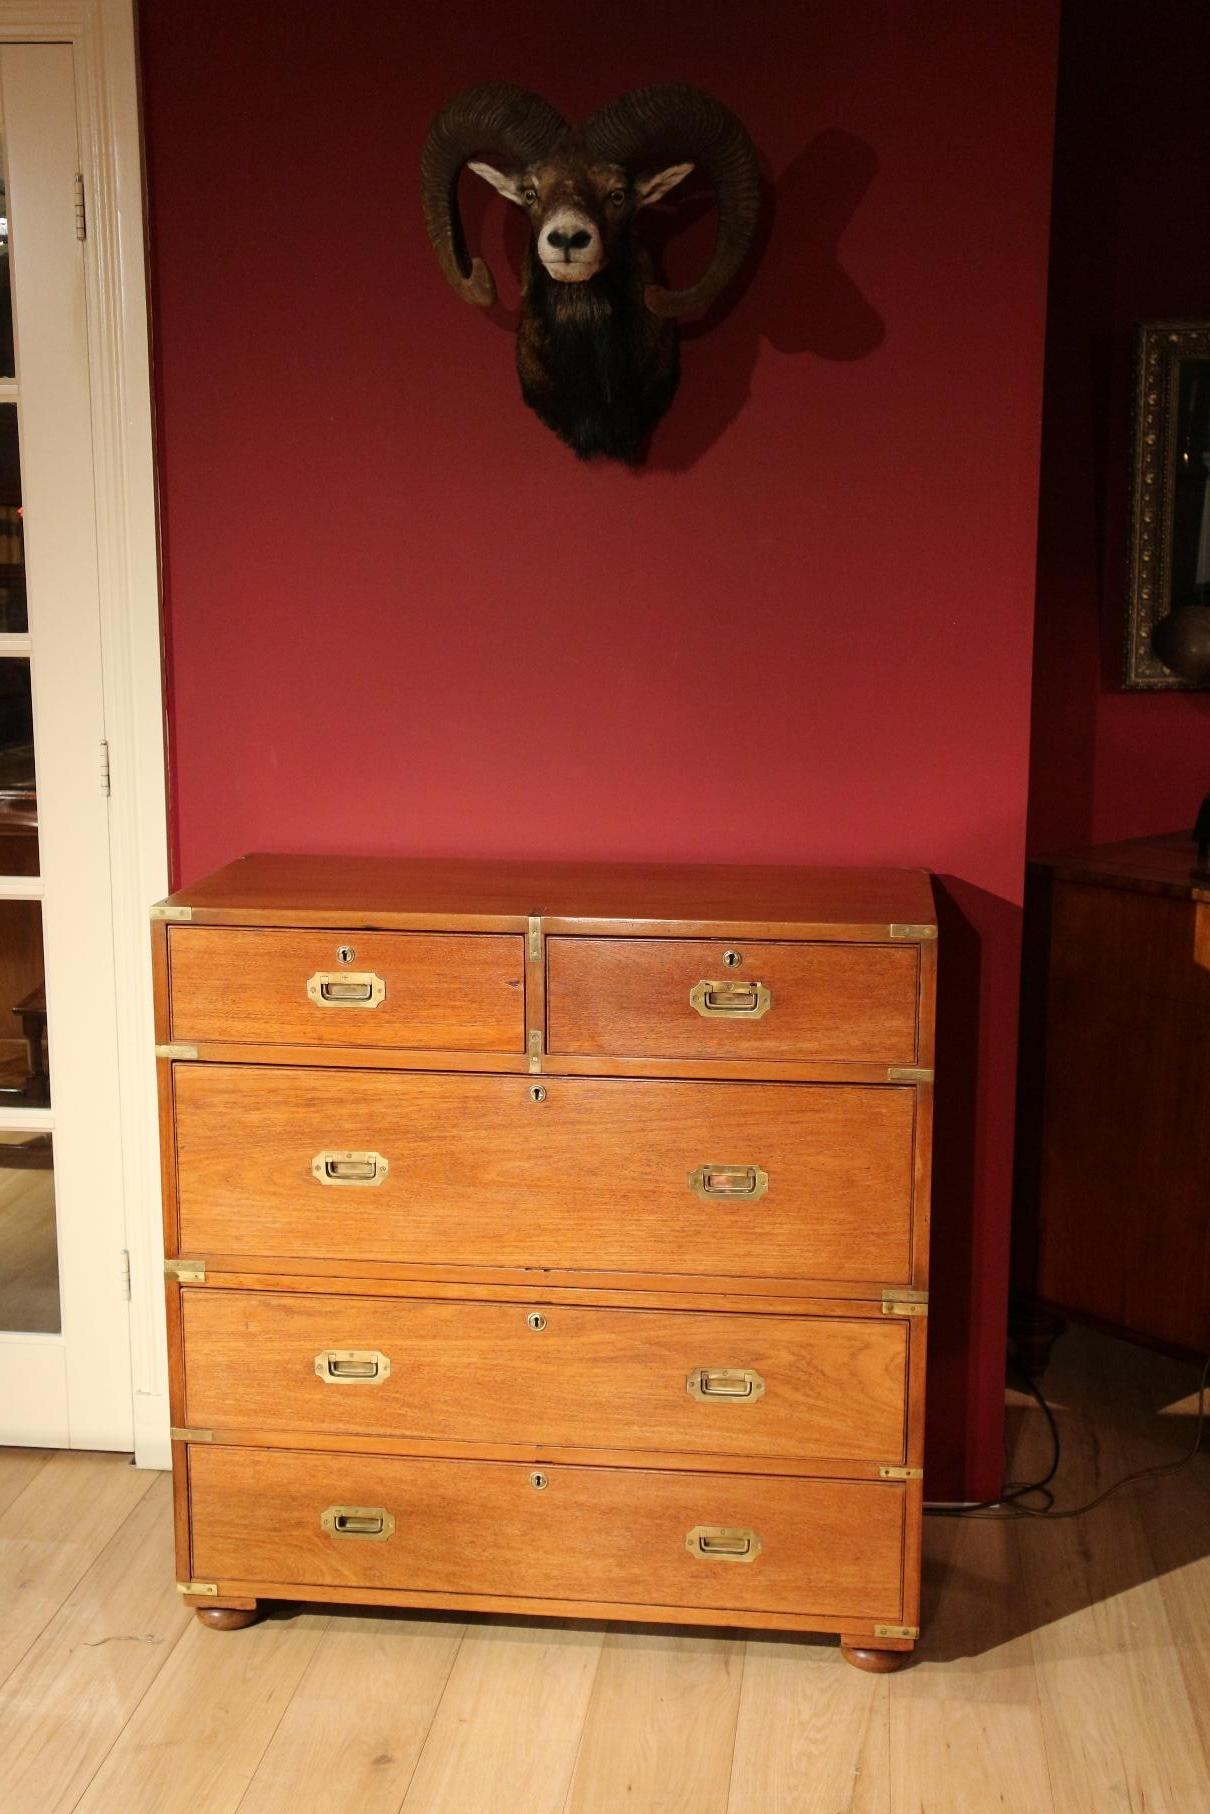 Beautiful sleek antique teak campaign chest of drawers from England, completely in perfect condition. Nice light color.

Origin: England

Period: Approx. 1840

Size: W 99 cm, D 45 cm, H 100 cm

These cabinets were taken by the officers of